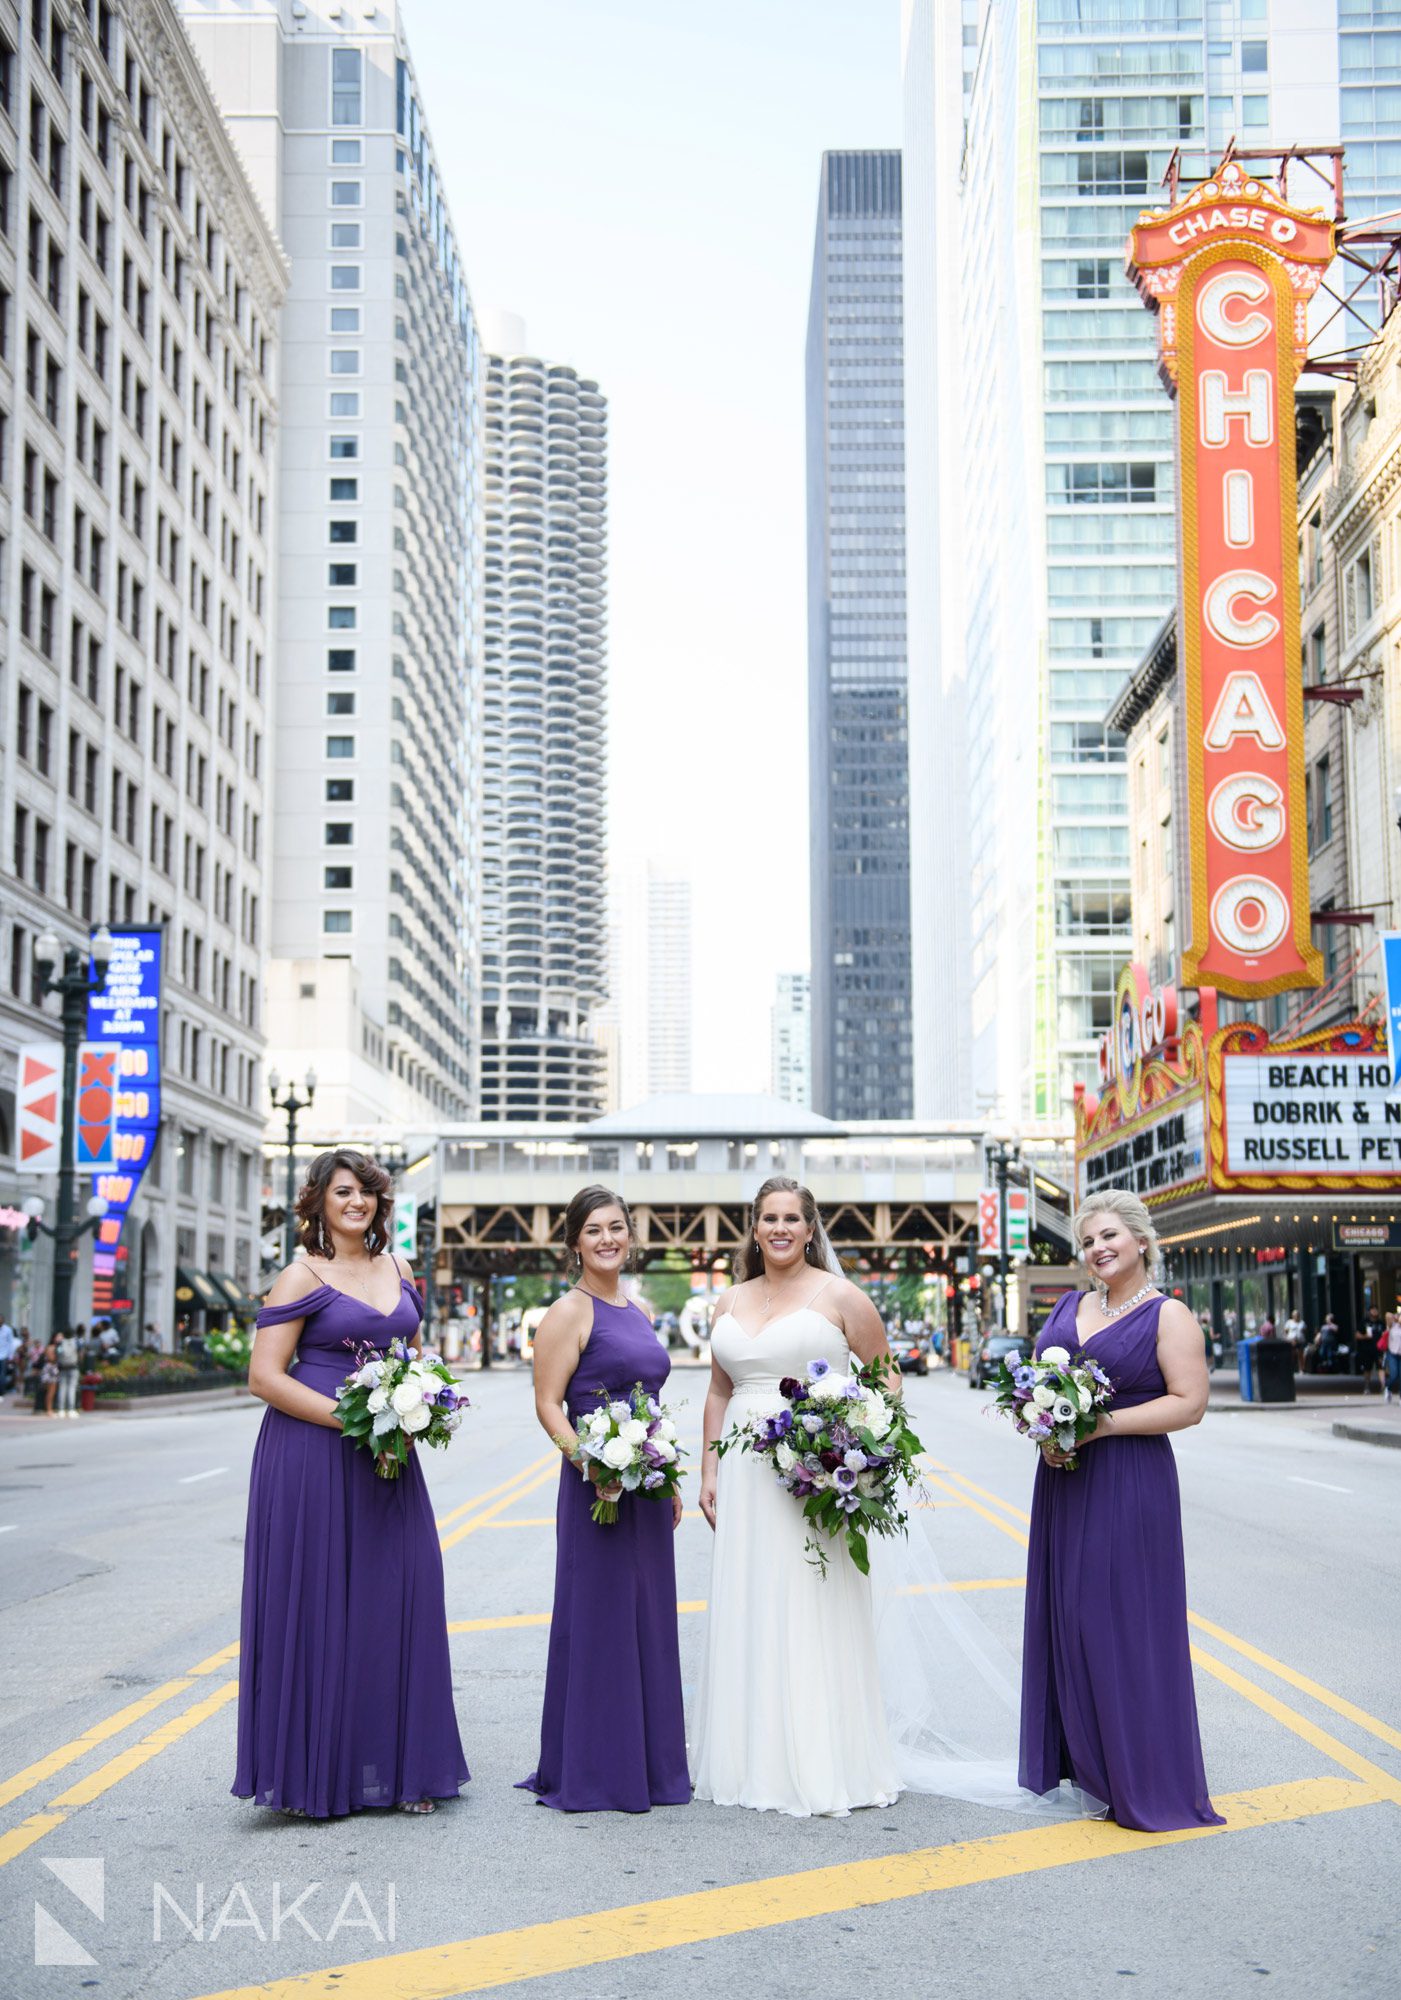 Chicago theatre sign wedding photographer bridal party